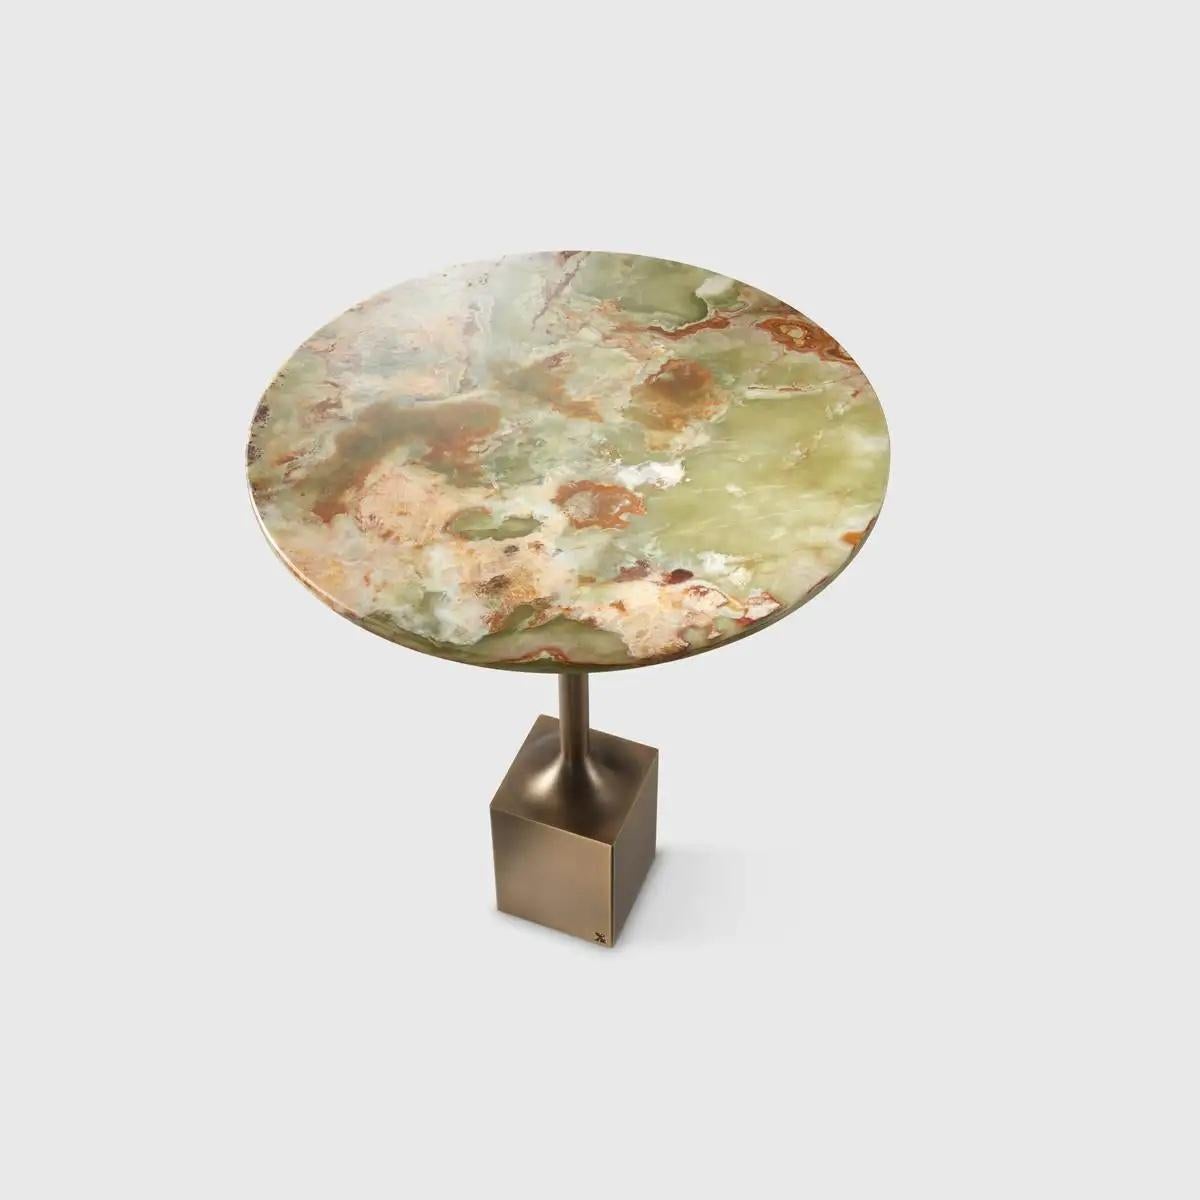 Side Table 'Madison Avenue' by Man of Parts 
Signed by Yabu Pushelberg 

Pakistani onyx table top
Brushed brass table base 

Dimensions: 
H. 47 x D. 40.5 cm


_____________________

The Madison Avenue side table is a stylish place for a cocktail on